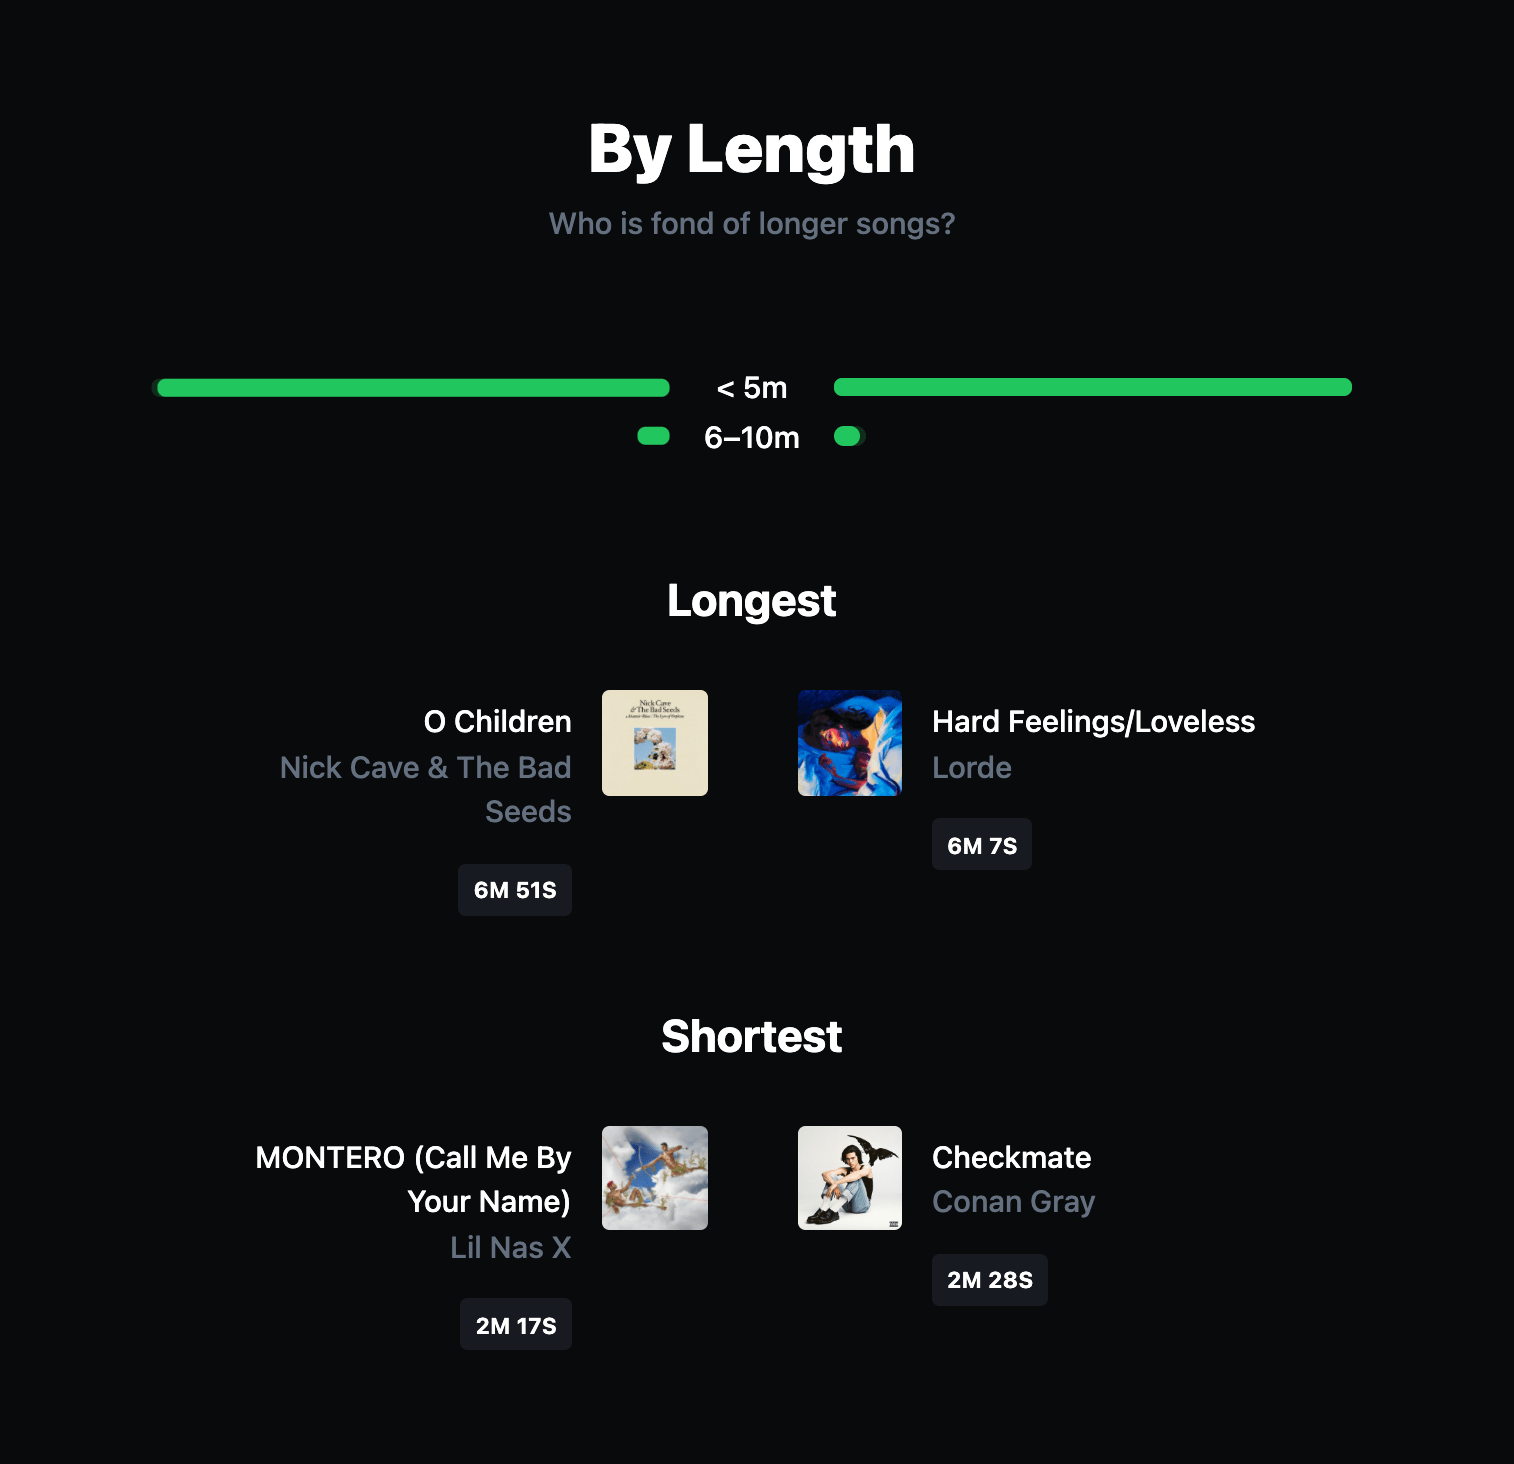 By Length